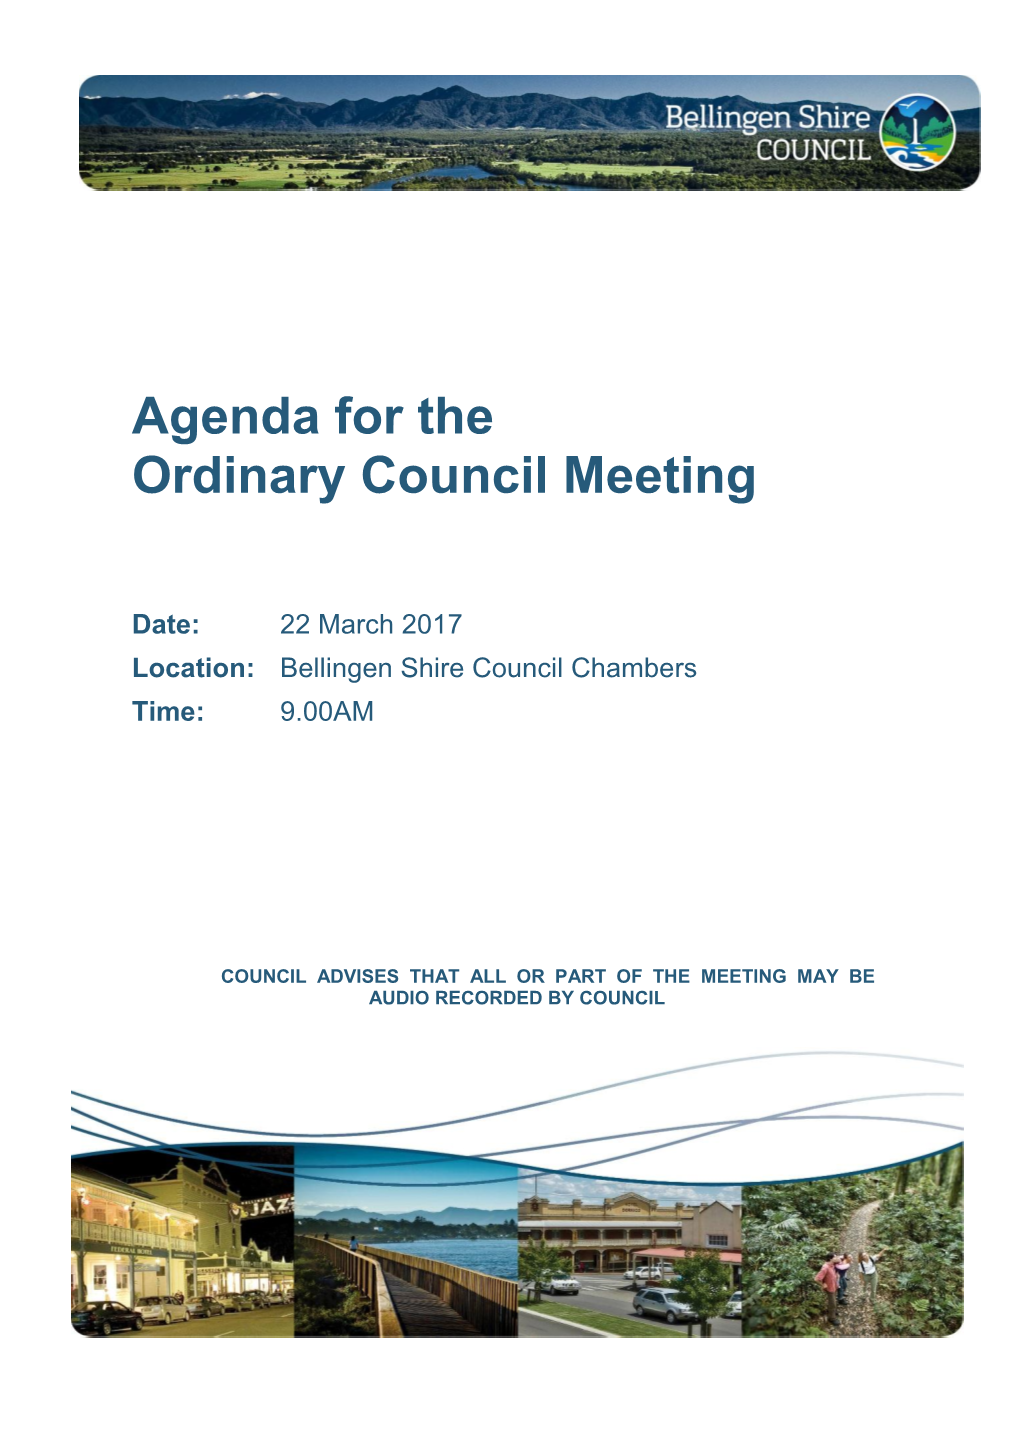 Agenda for the Ordinary Council Meeting